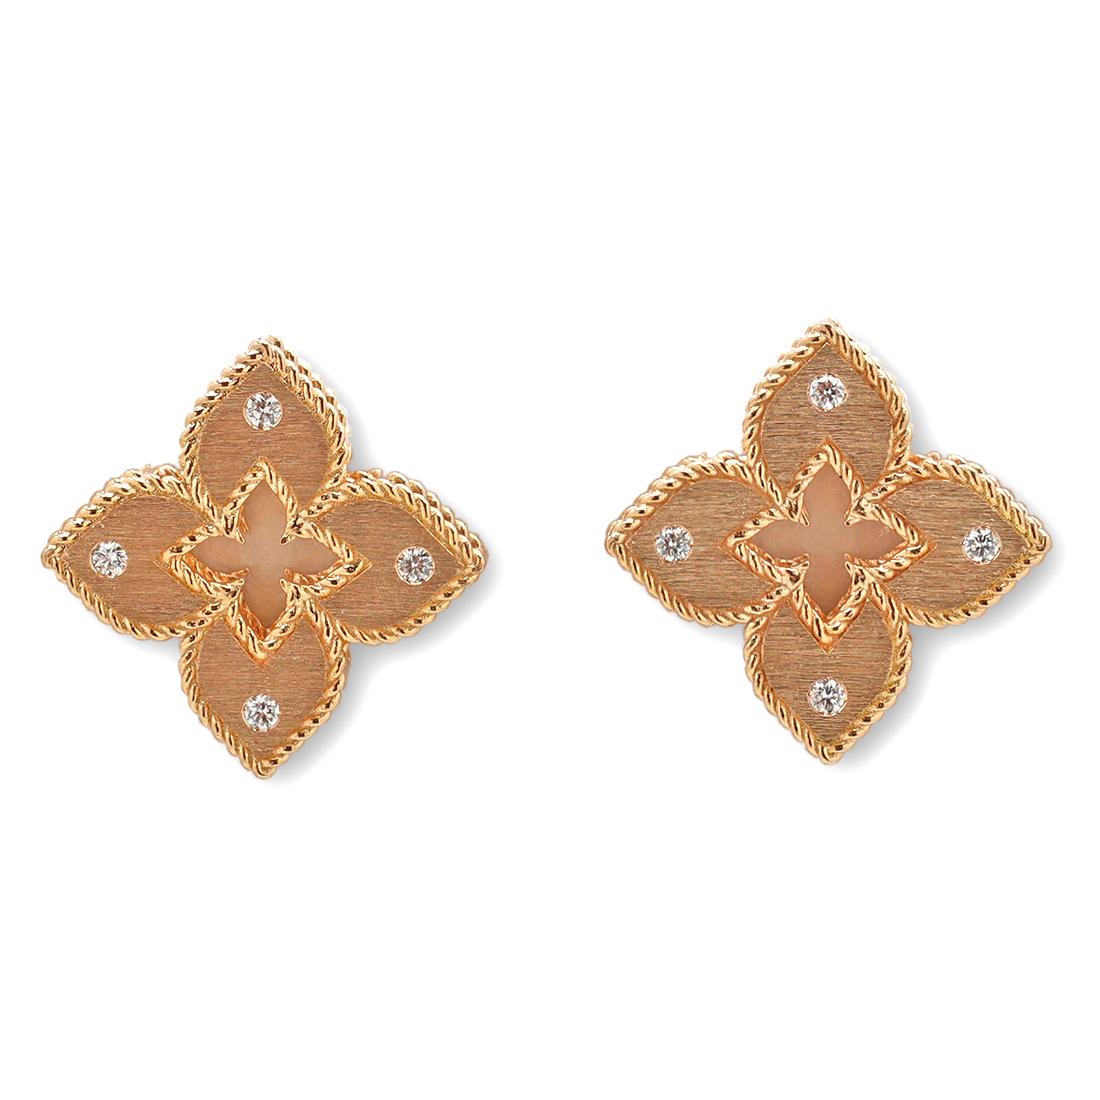 Authentic Roberto Coin 'Venetian Princess' earrings crafted in 18 karat rose gold with a brushed finish.  The quatrefoil-shaped earrings feature a rope trim and diamond accents at each of the four corners for an estimated 0.12 carats total weight. 